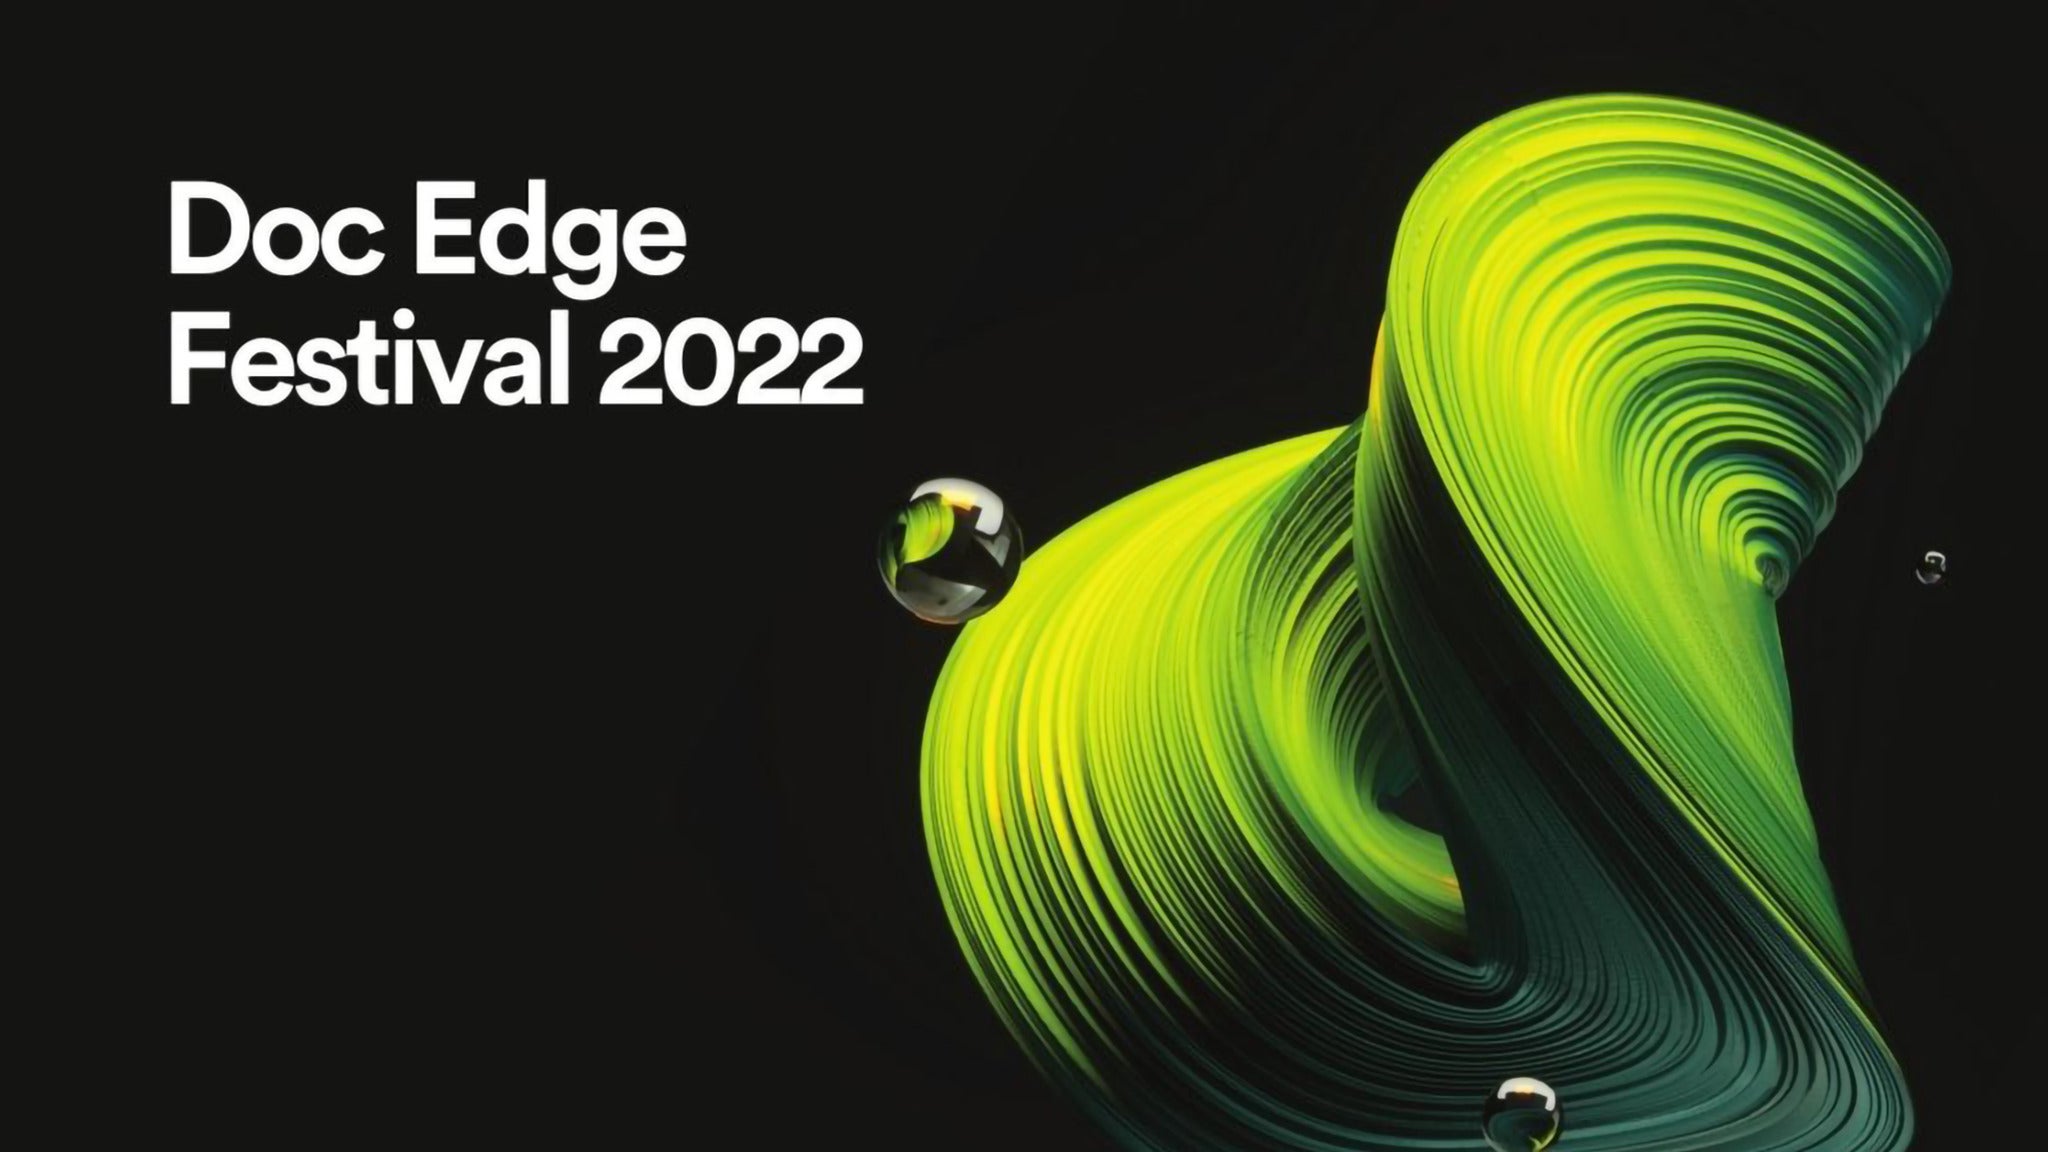 Image used with permission from Ticketmaster | Doc Edge Film Festival 2022: Delikado tickets